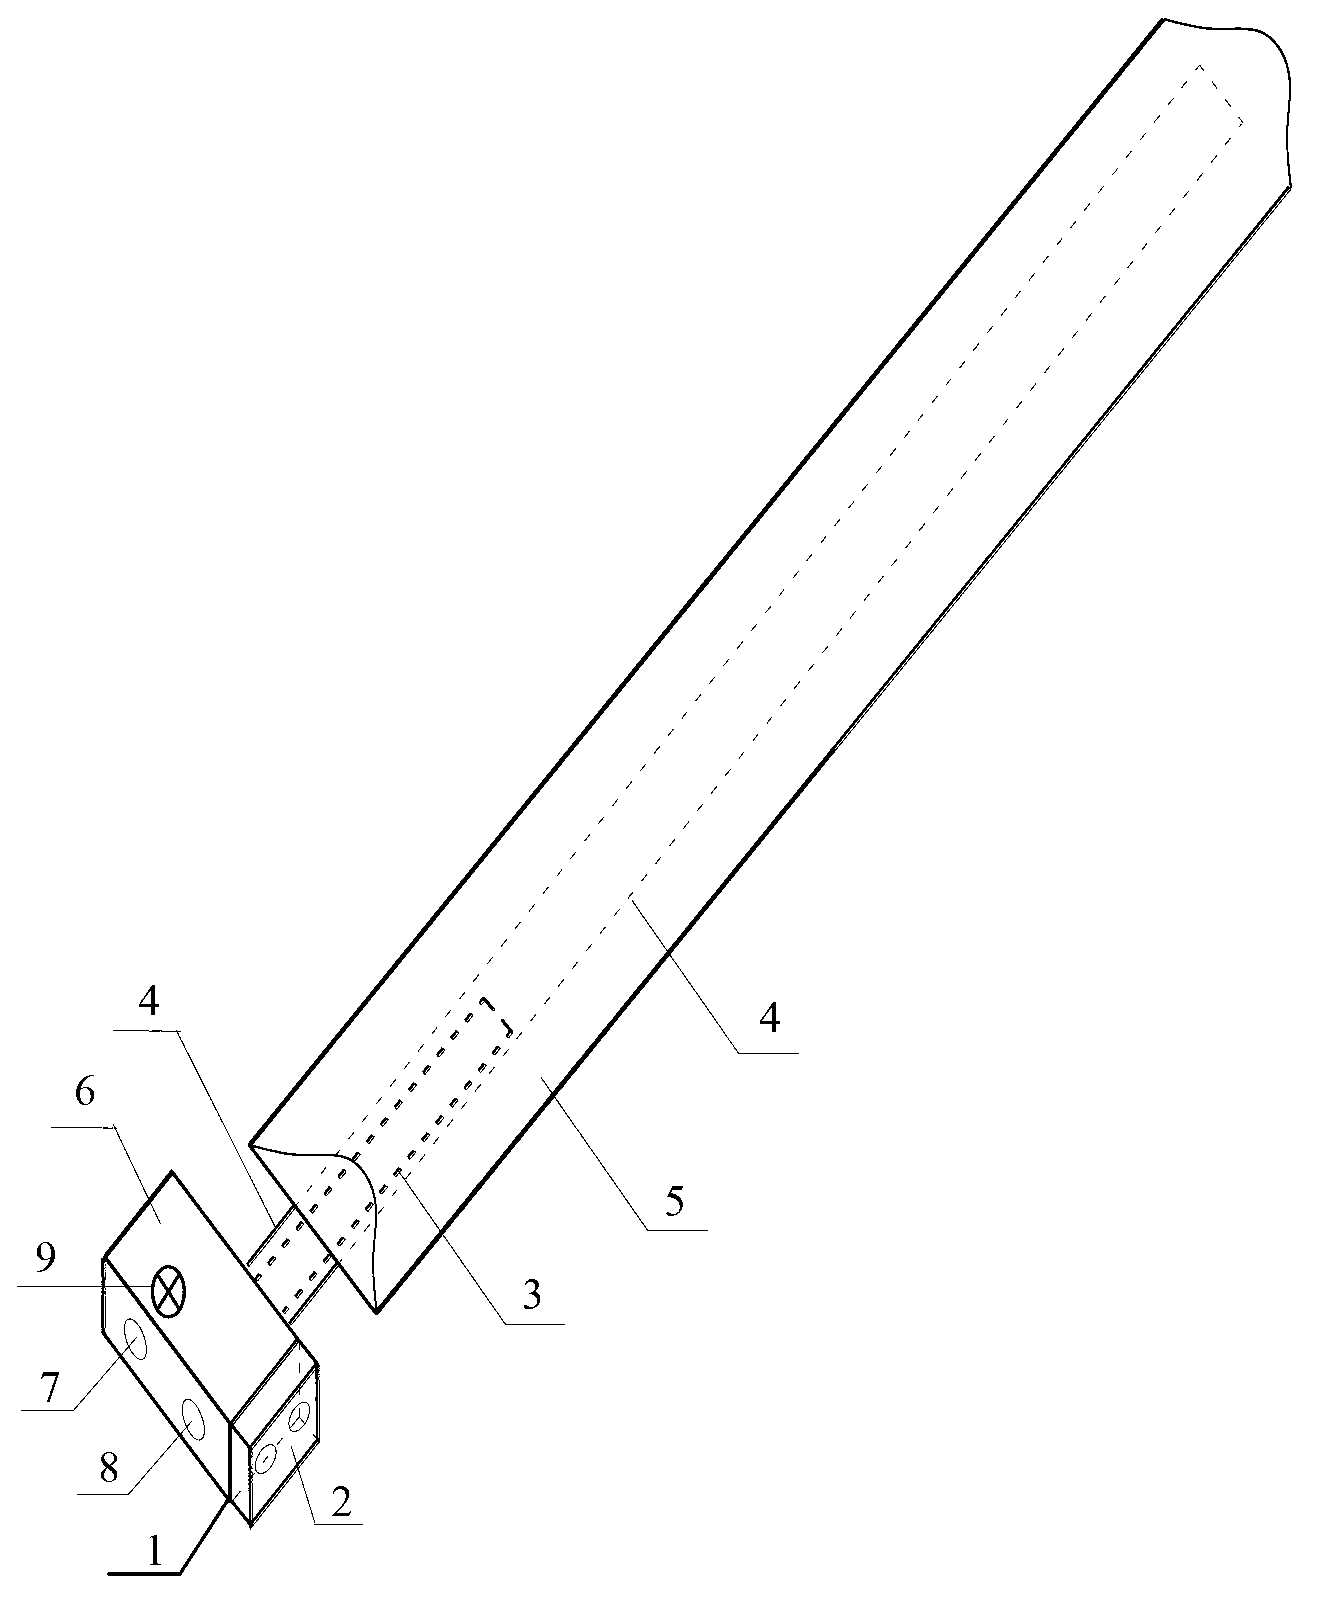 Fuel gas infrared radiation heating device based on pulse combustion